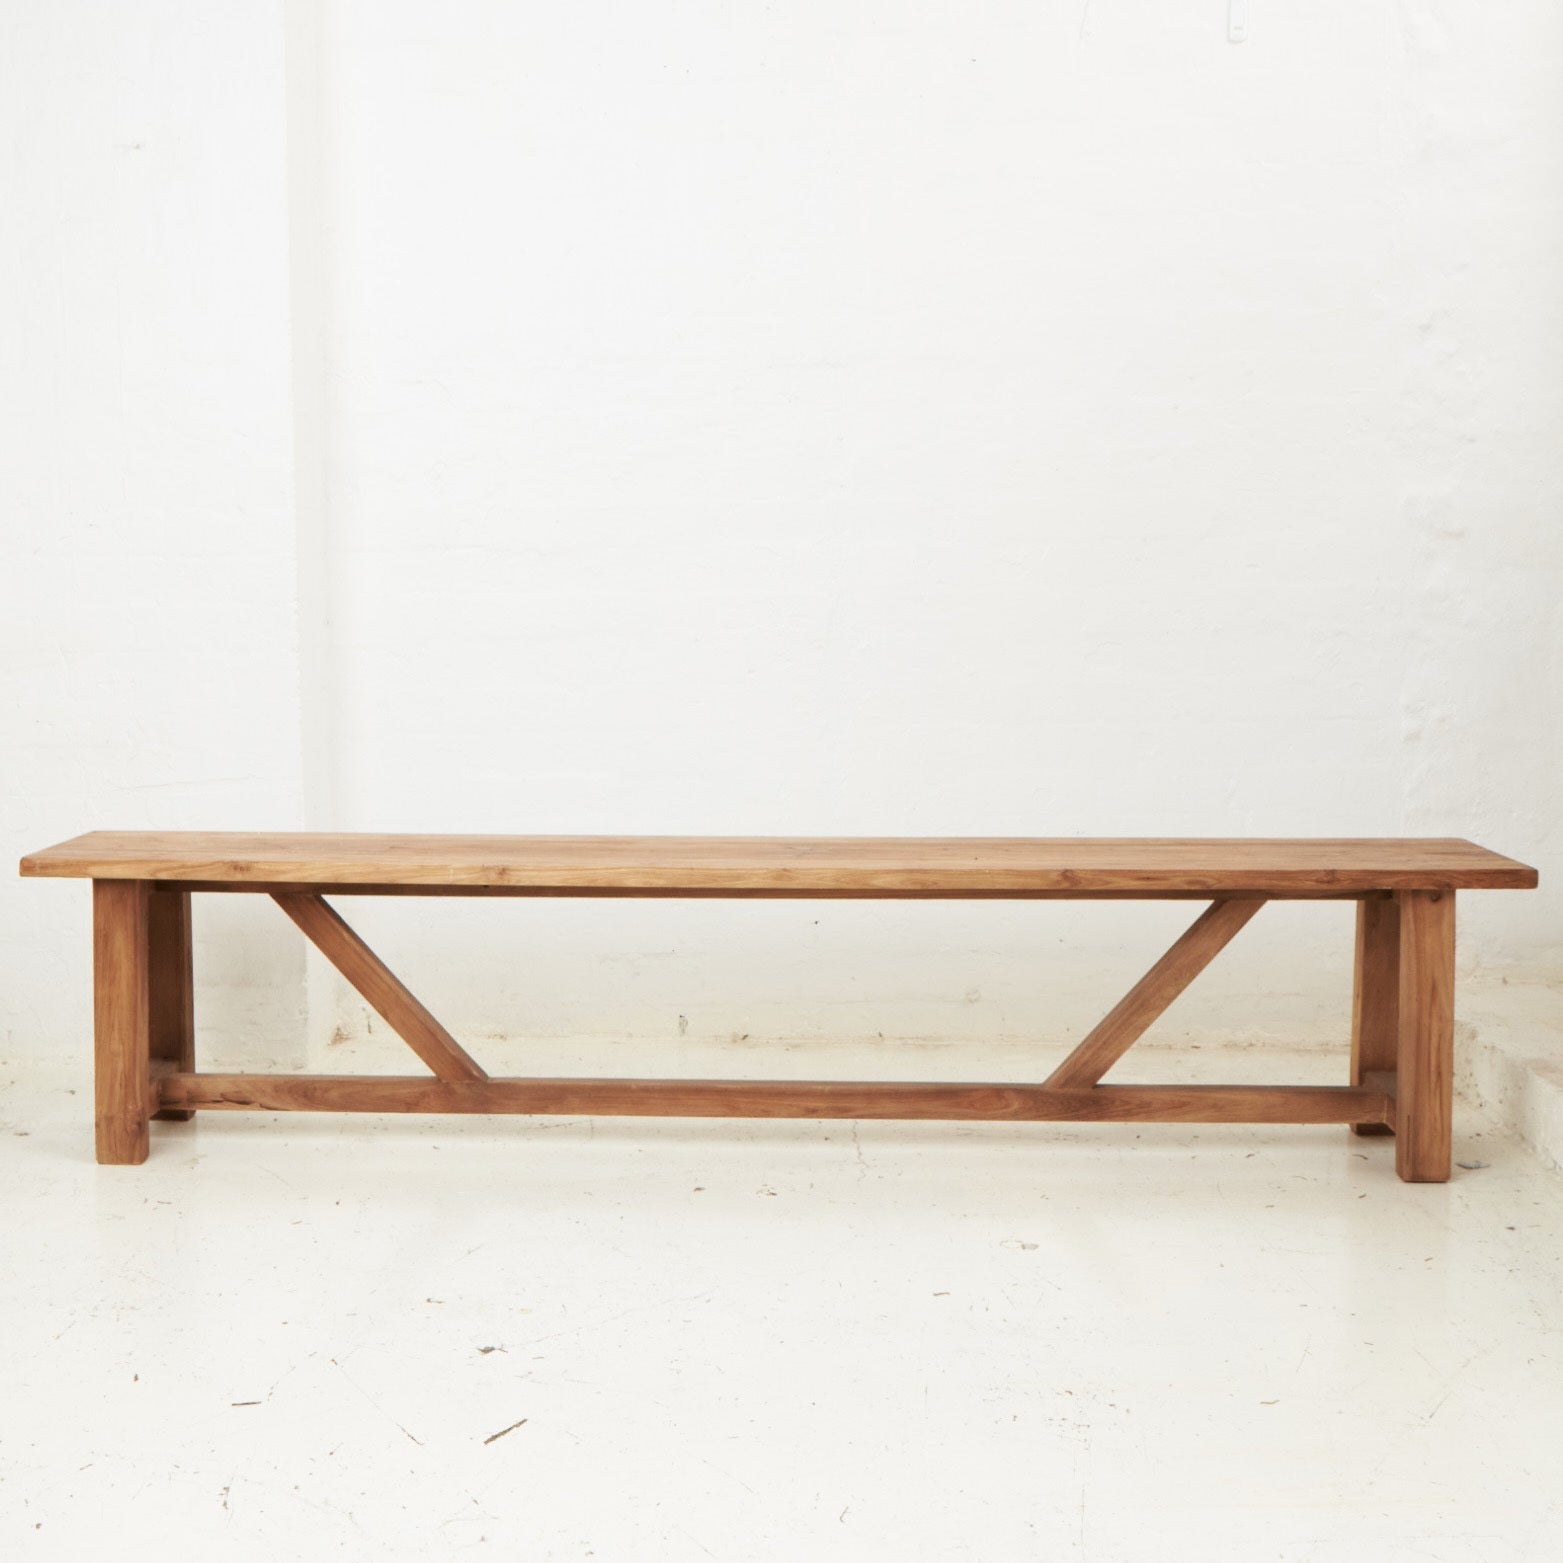 RUSTIC BENCH SEAT - 2M | Creeping Fig